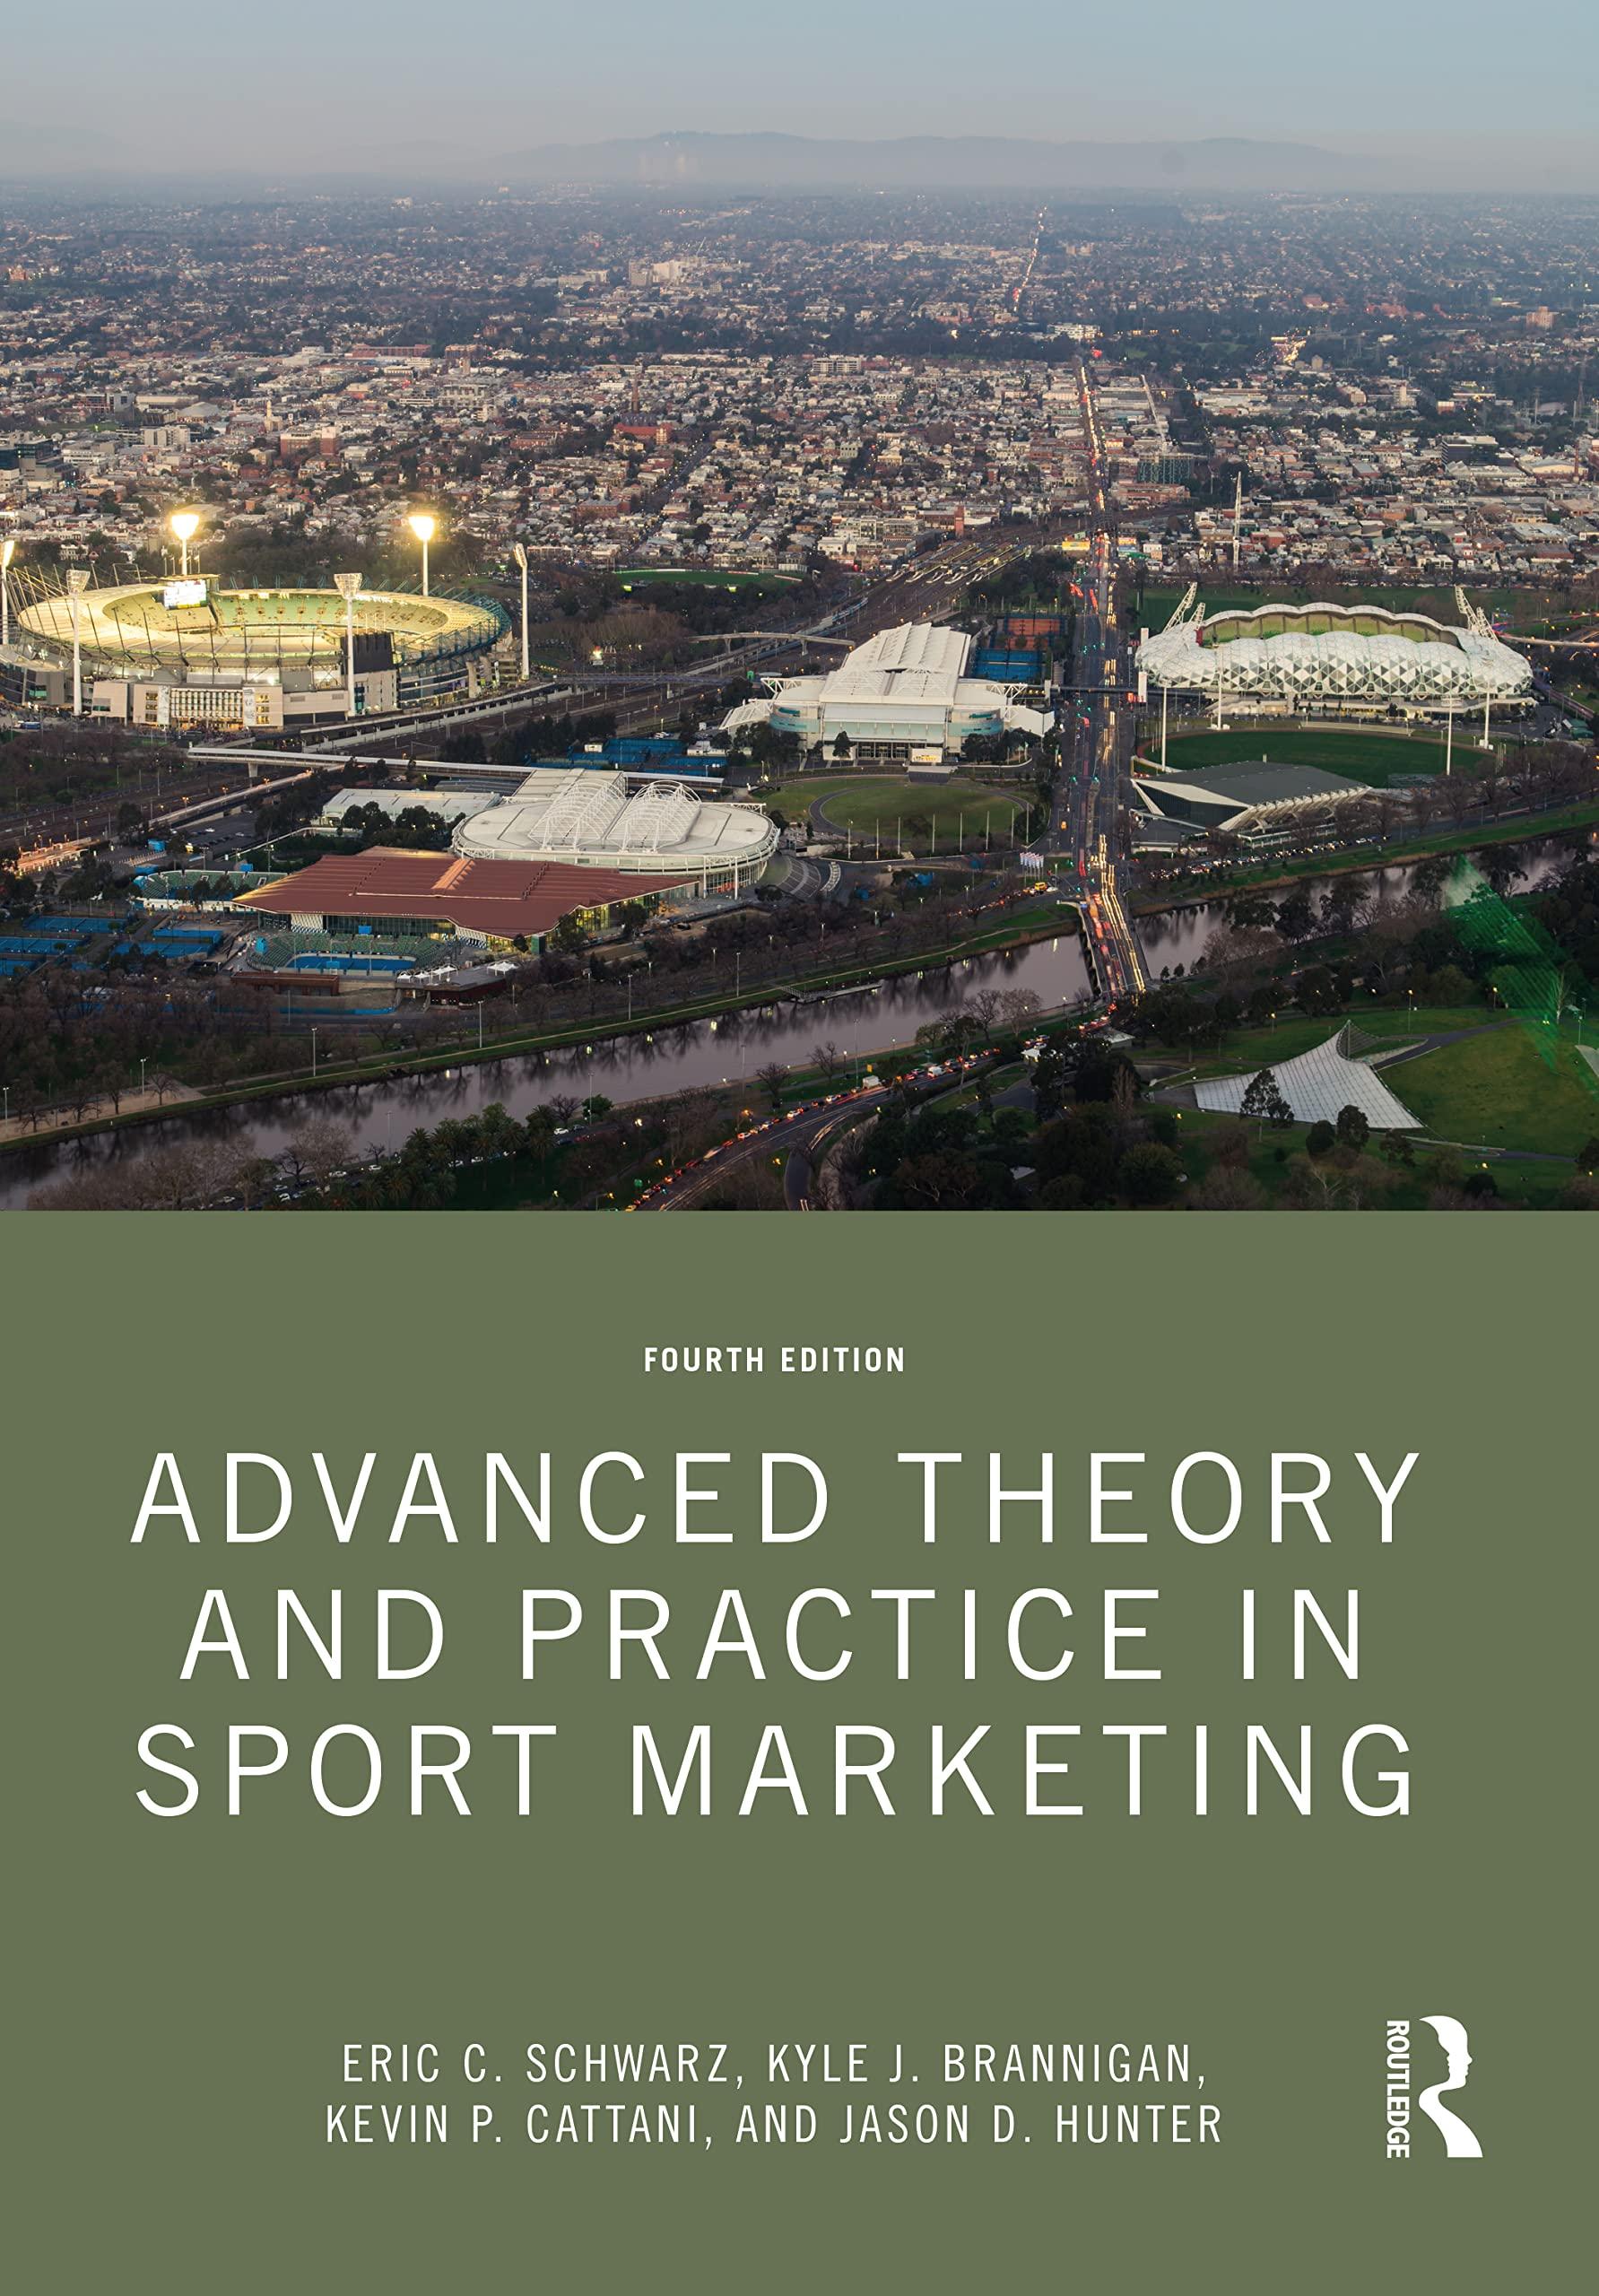 advanced theory and practice in sport marketing 4th edition eric c. schwarz, kyle j. brannigan, kevin p.